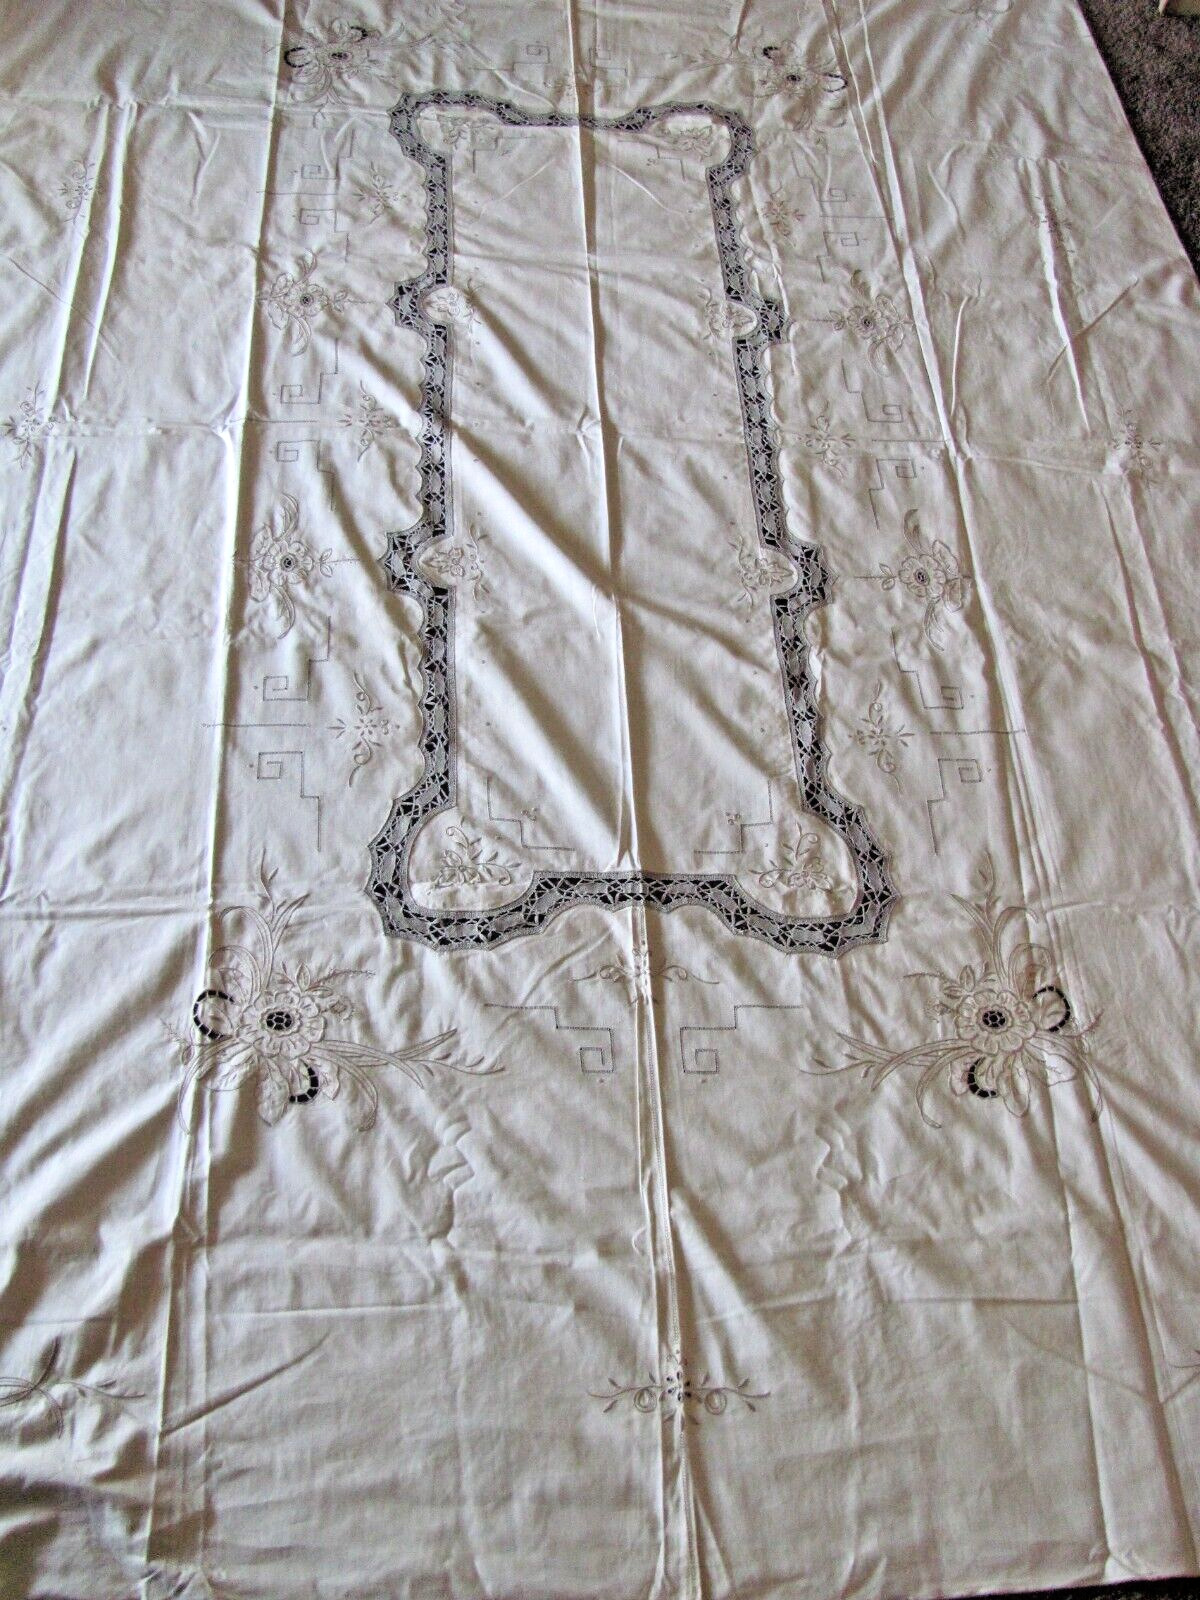 Vintage Cotton Embroidered Banquet Tablecloth w Napkins - Unused - Floral & Lace